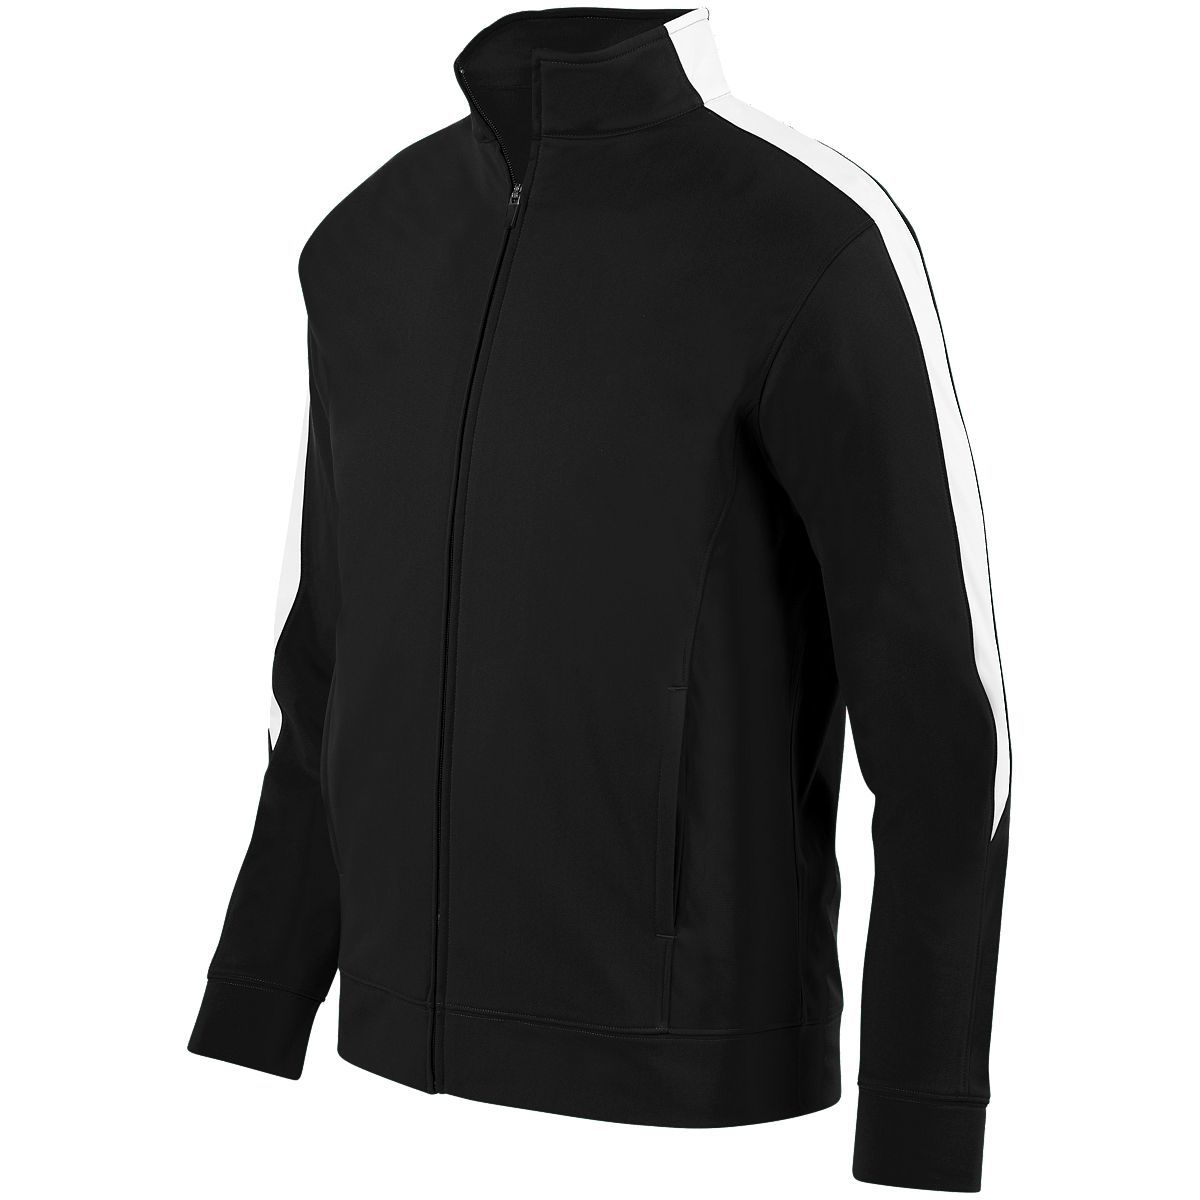 Augusta Sportswear Youth Medalist Jacket 2.0 in Black/White  -Part of the Youth, Youth-Jacket, Augusta-Products, Outerwear product lines at KanaleyCreations.com